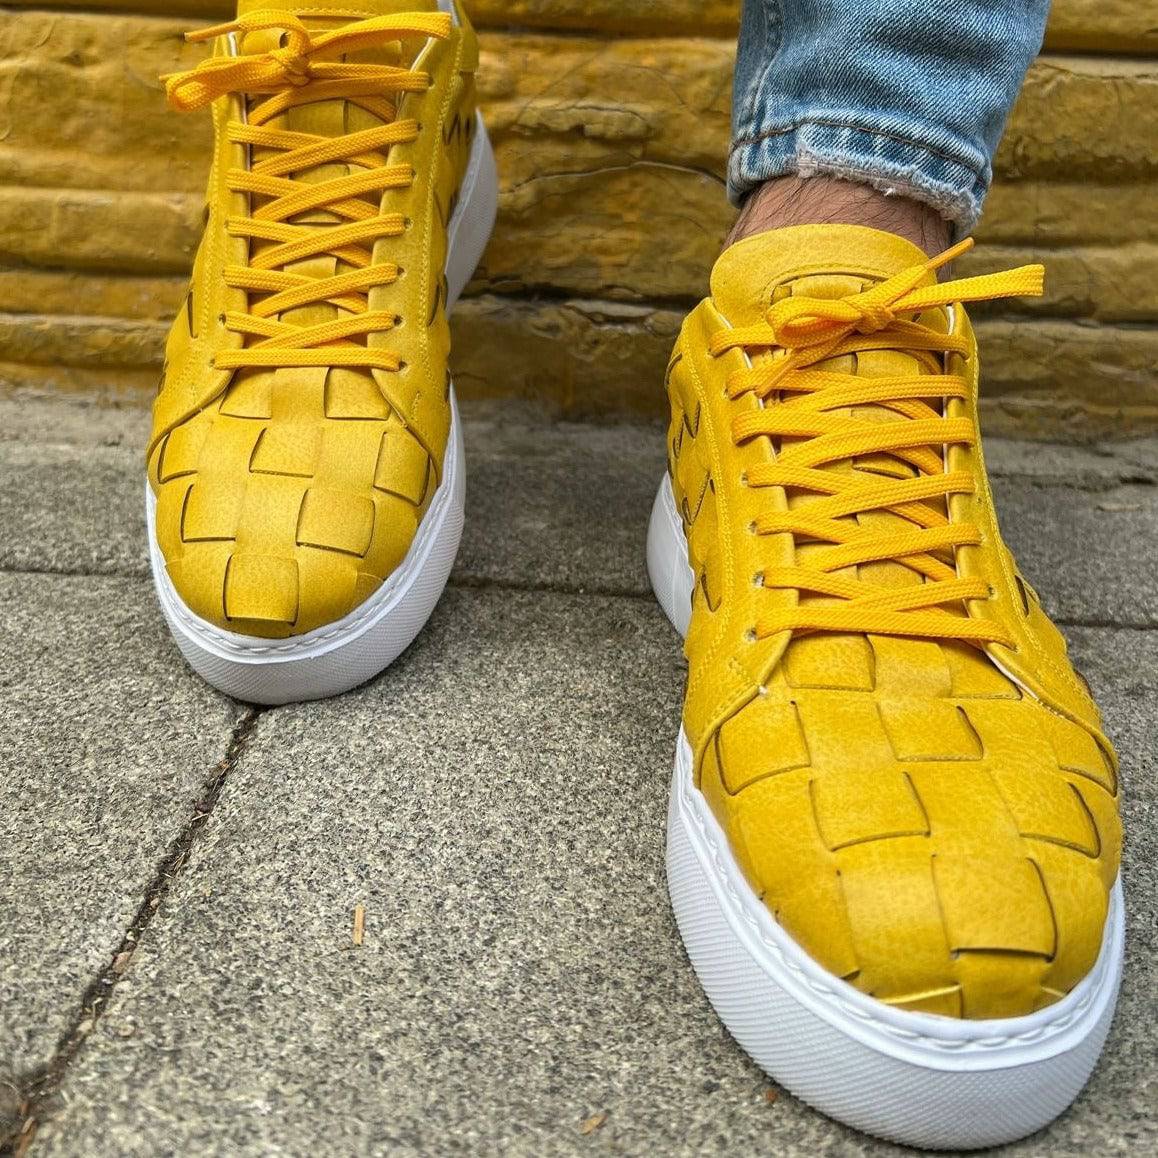 Casual Fashionable Sneakers for Men by Apollo Moda | Zeus Sunlit Weave